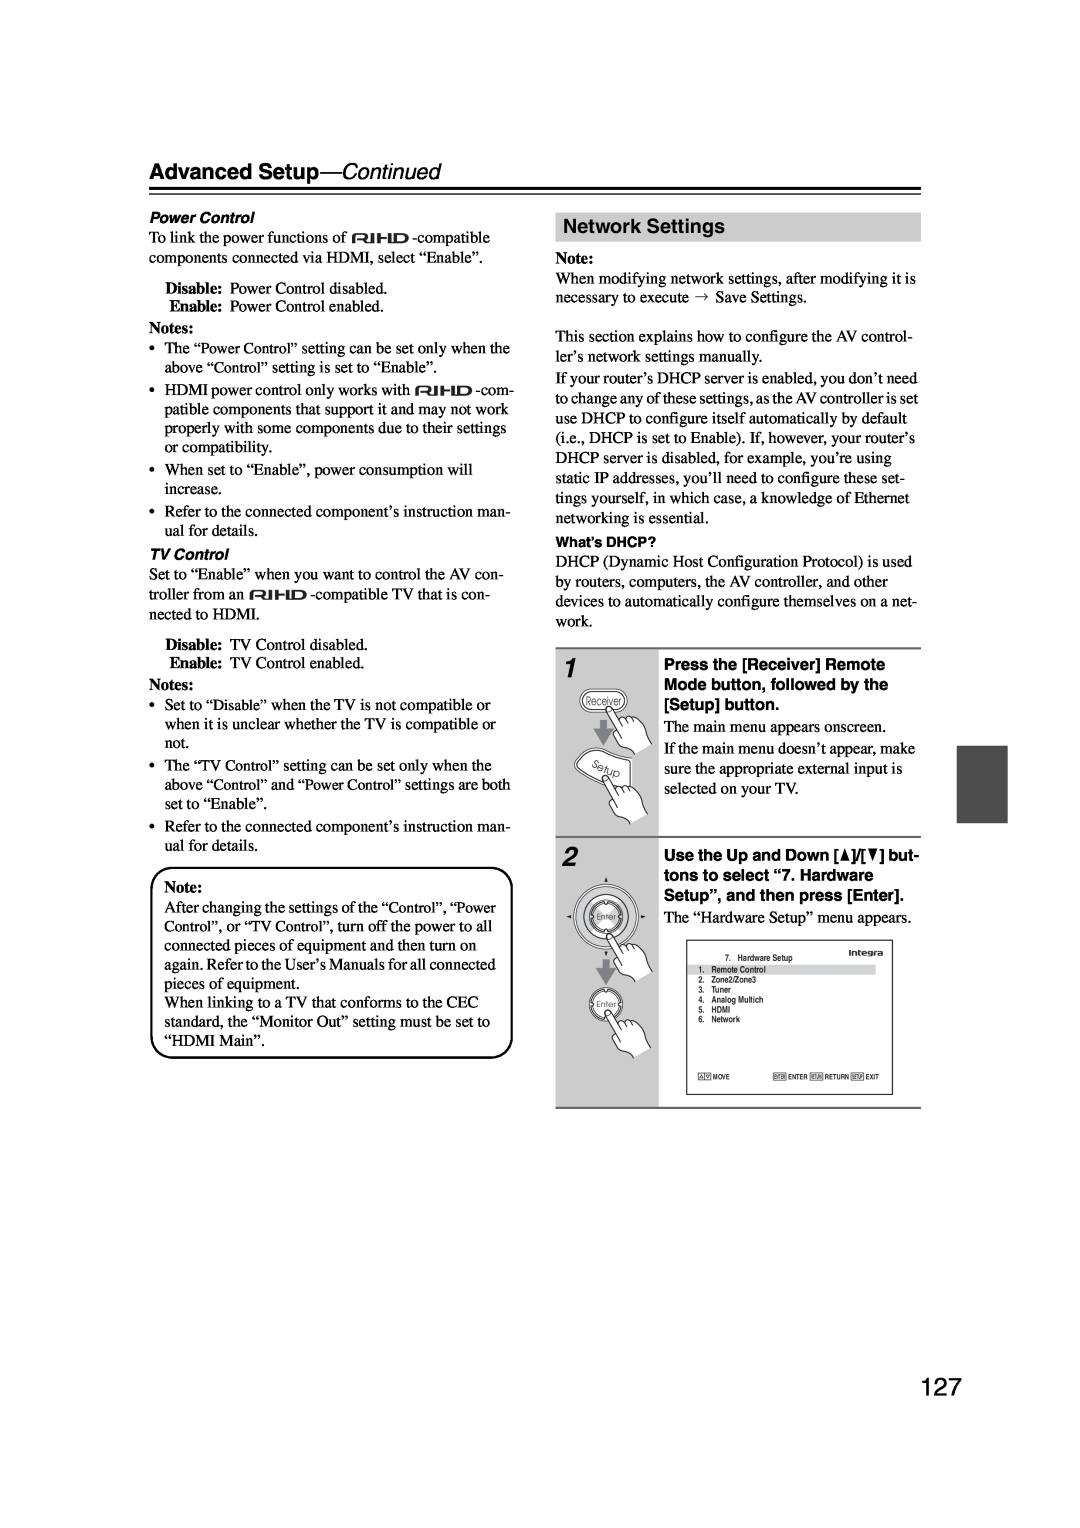 Integra DHC-9.9 instruction manual Network Settings, Advanced Setup—Continued, Notes 